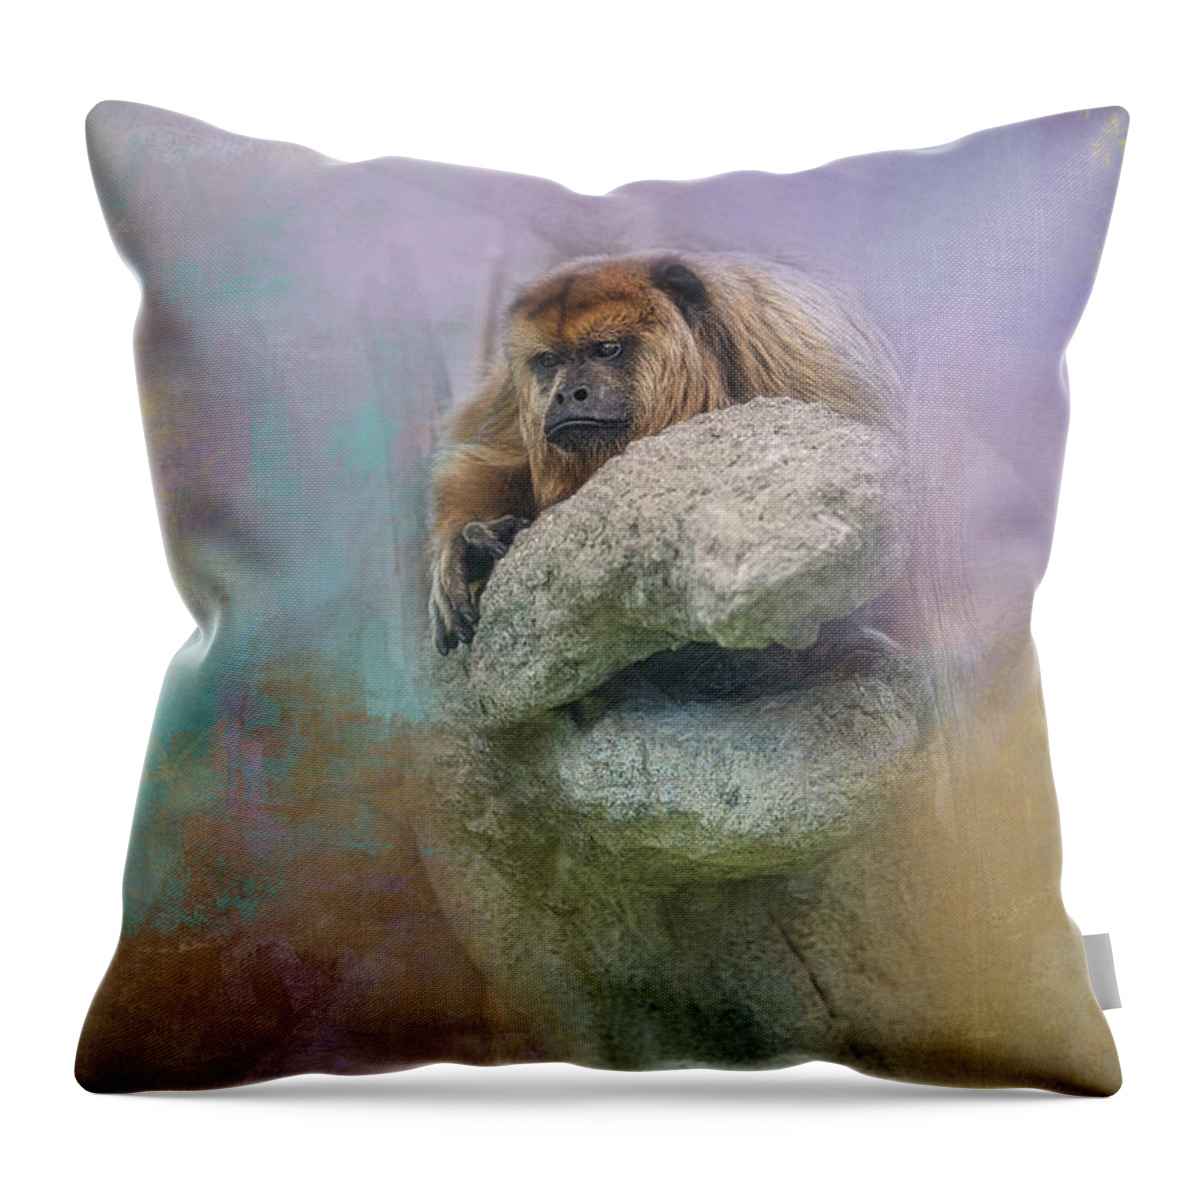 Monkey Throw Pillow featuring the digital art Monkey captured with texture by Amy Dundon